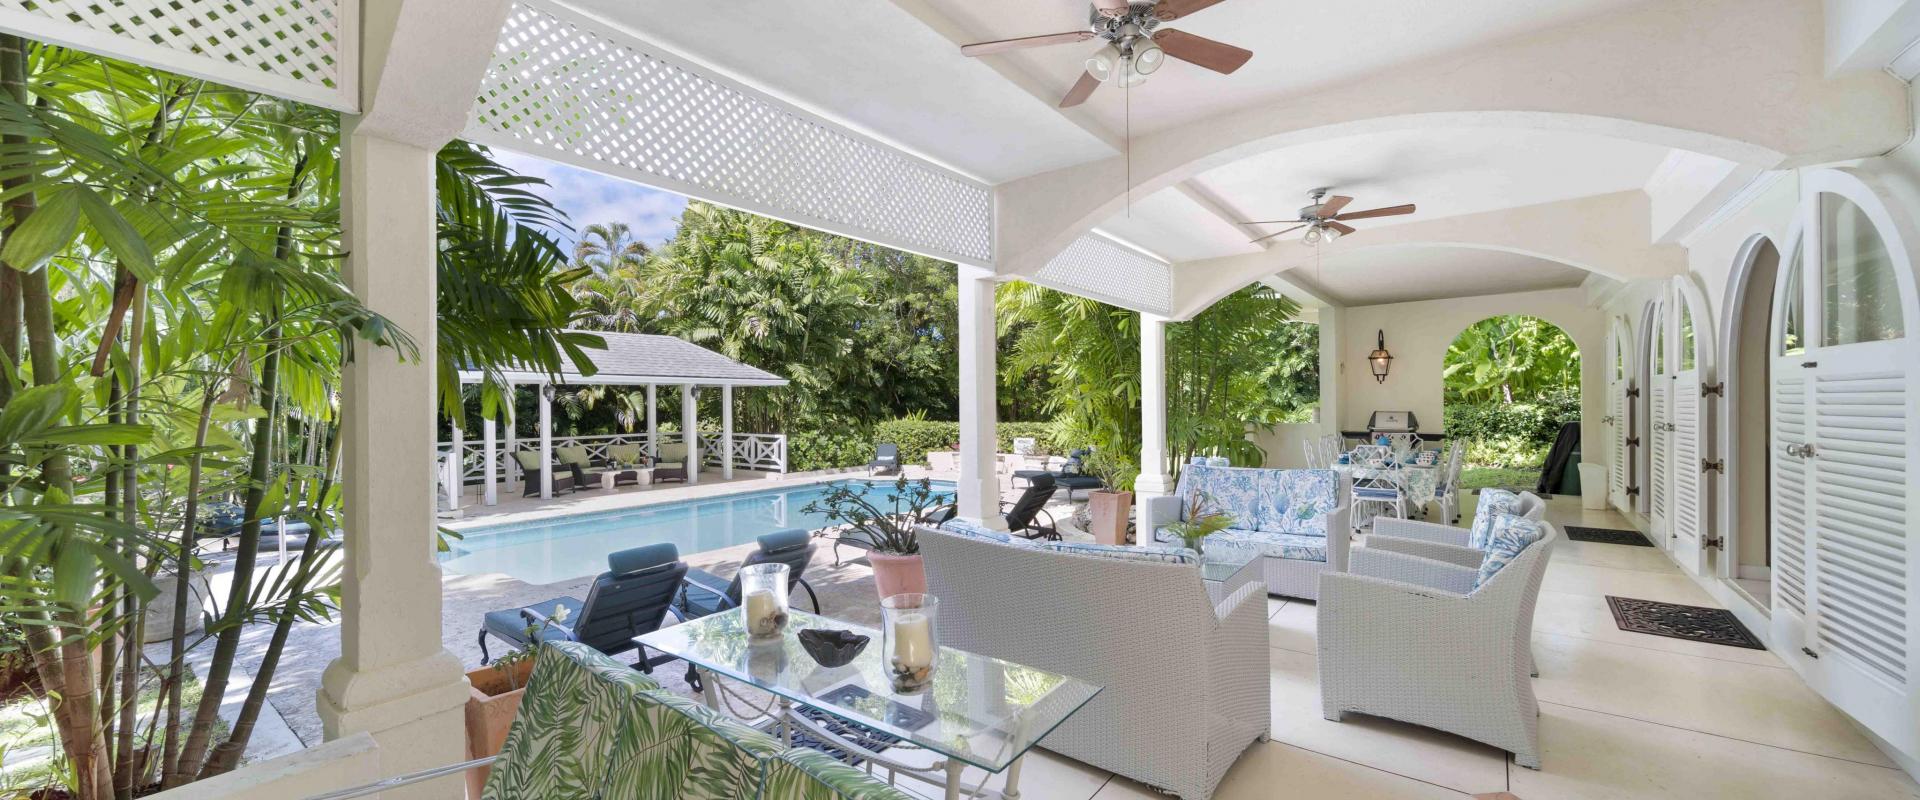 Dene Court Sandy Lane Barbados Covered Patio With Seating and Pool Deck View